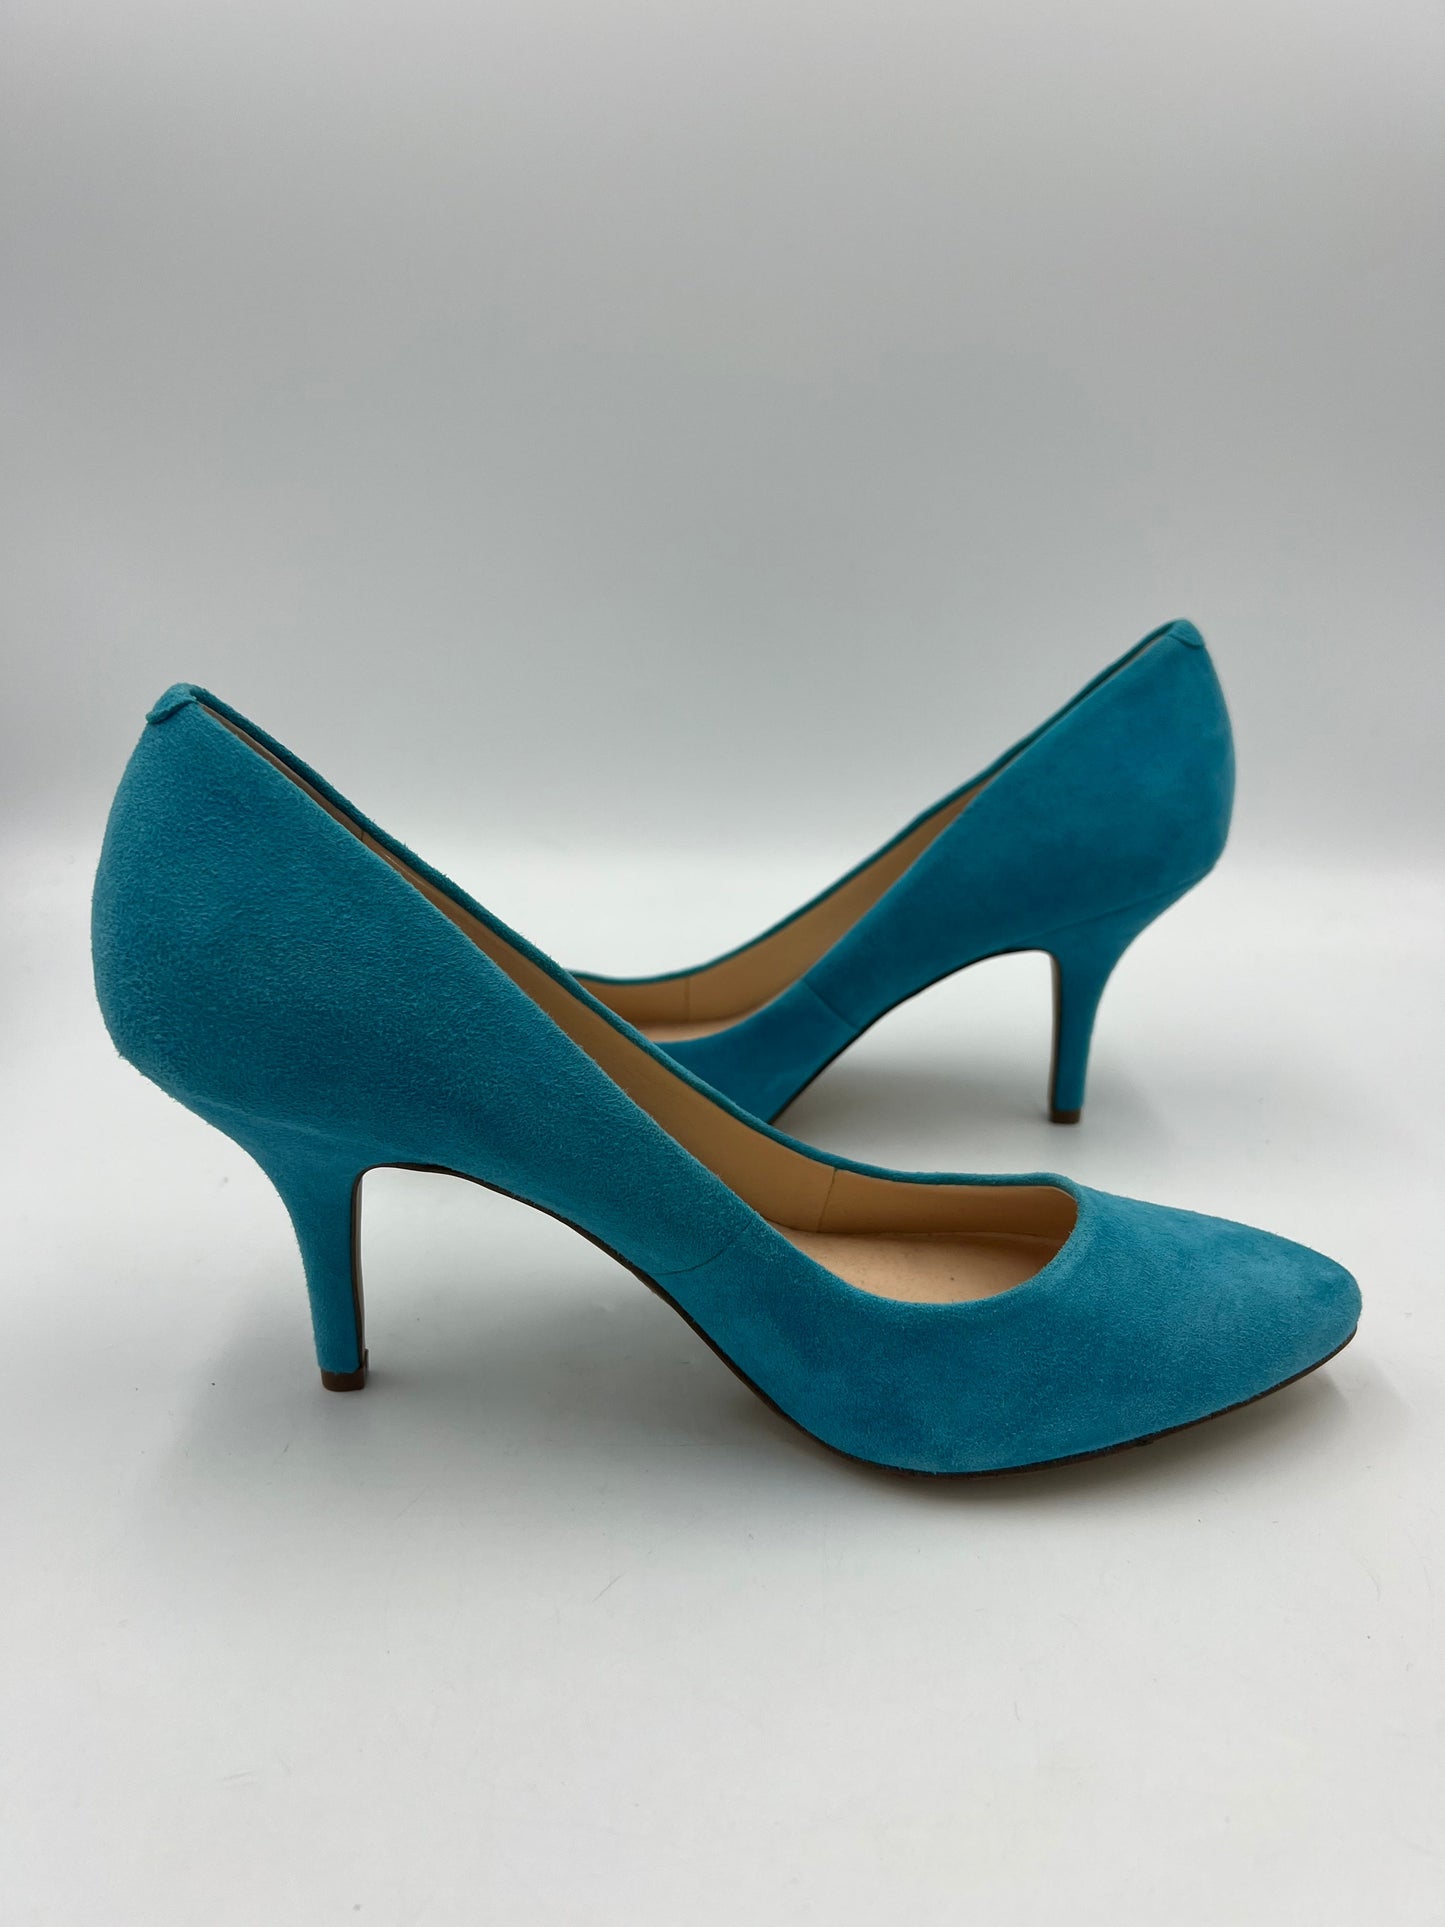 Shoes Heels Stiletto By Inc  Size: 9.5